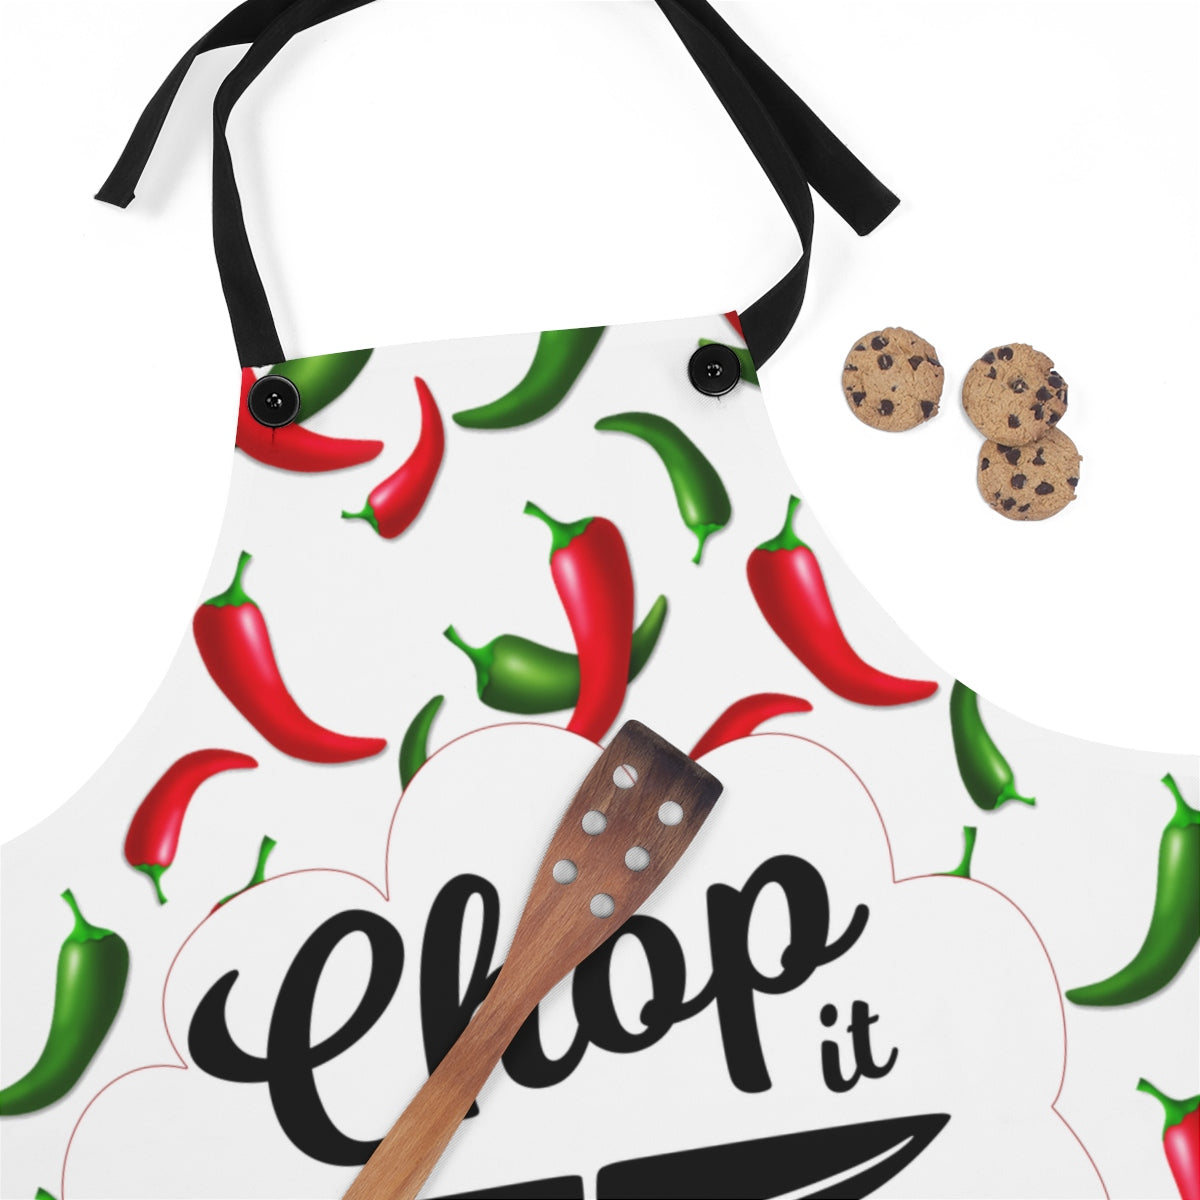 Cooking Gifts | Chop It Like It's Hot Apron | Kitchen Gadget - Cooking Gifts